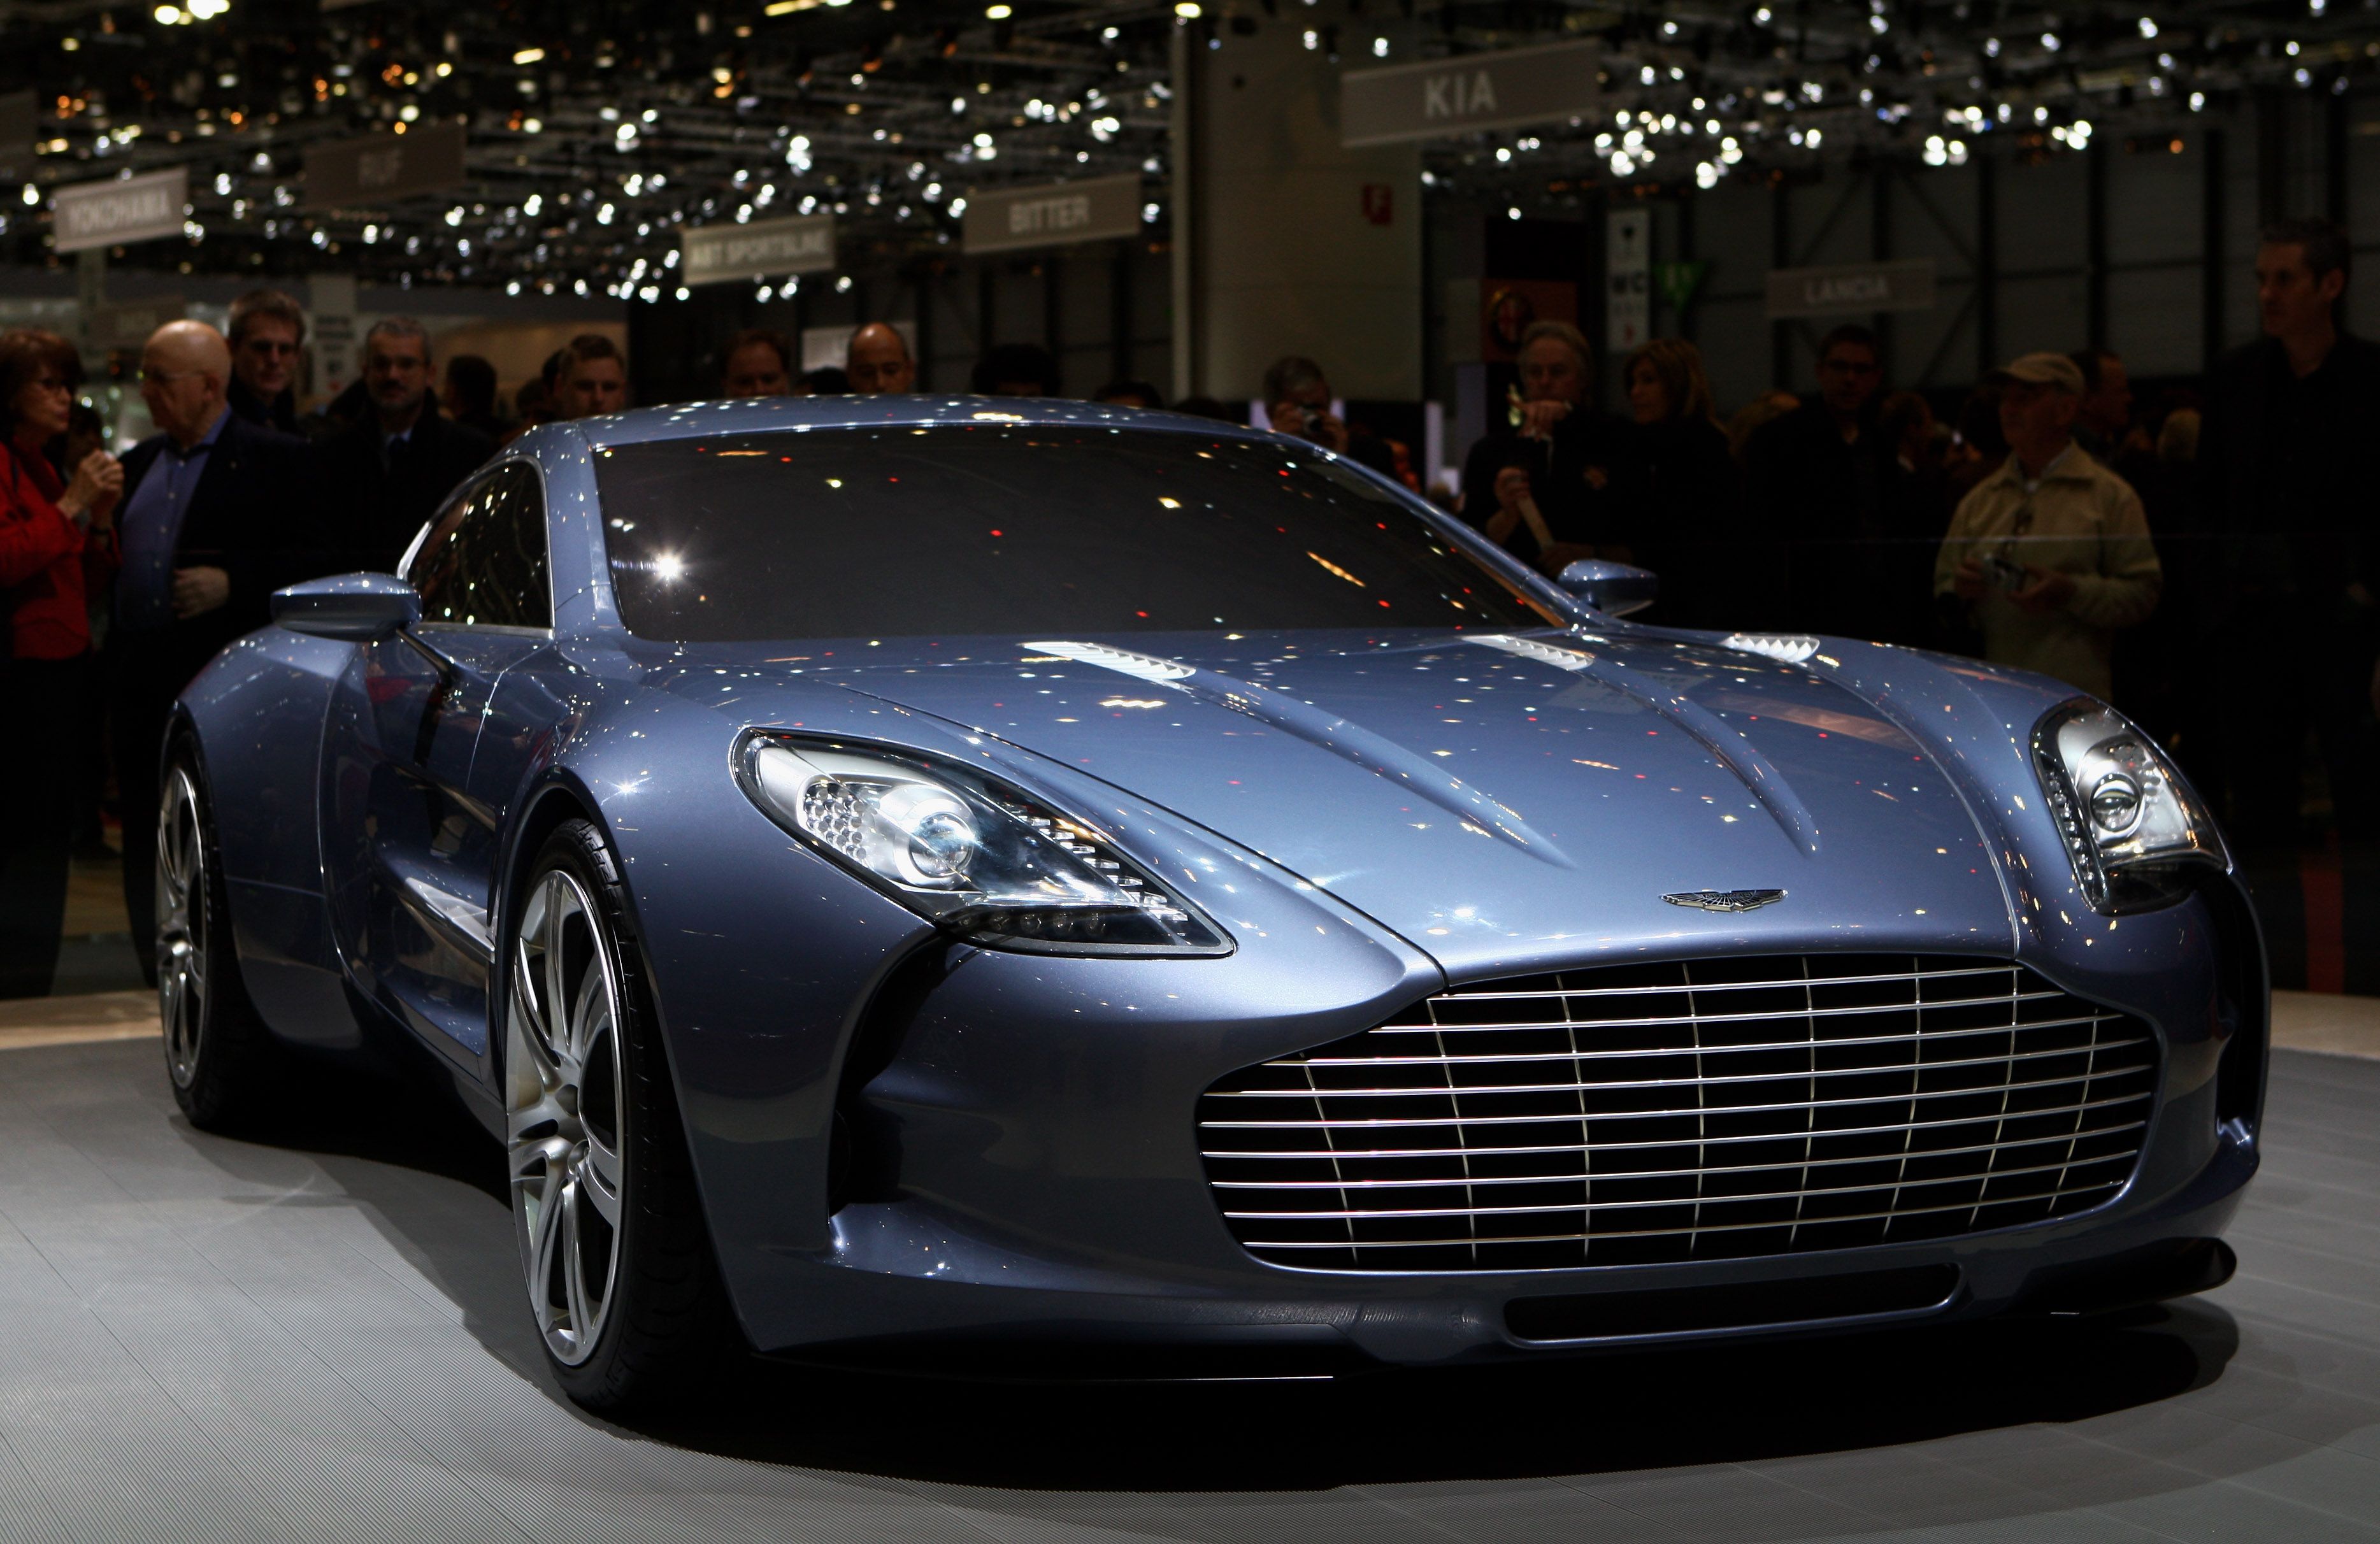 Aston Martin Insurance: Everything You Need to Know